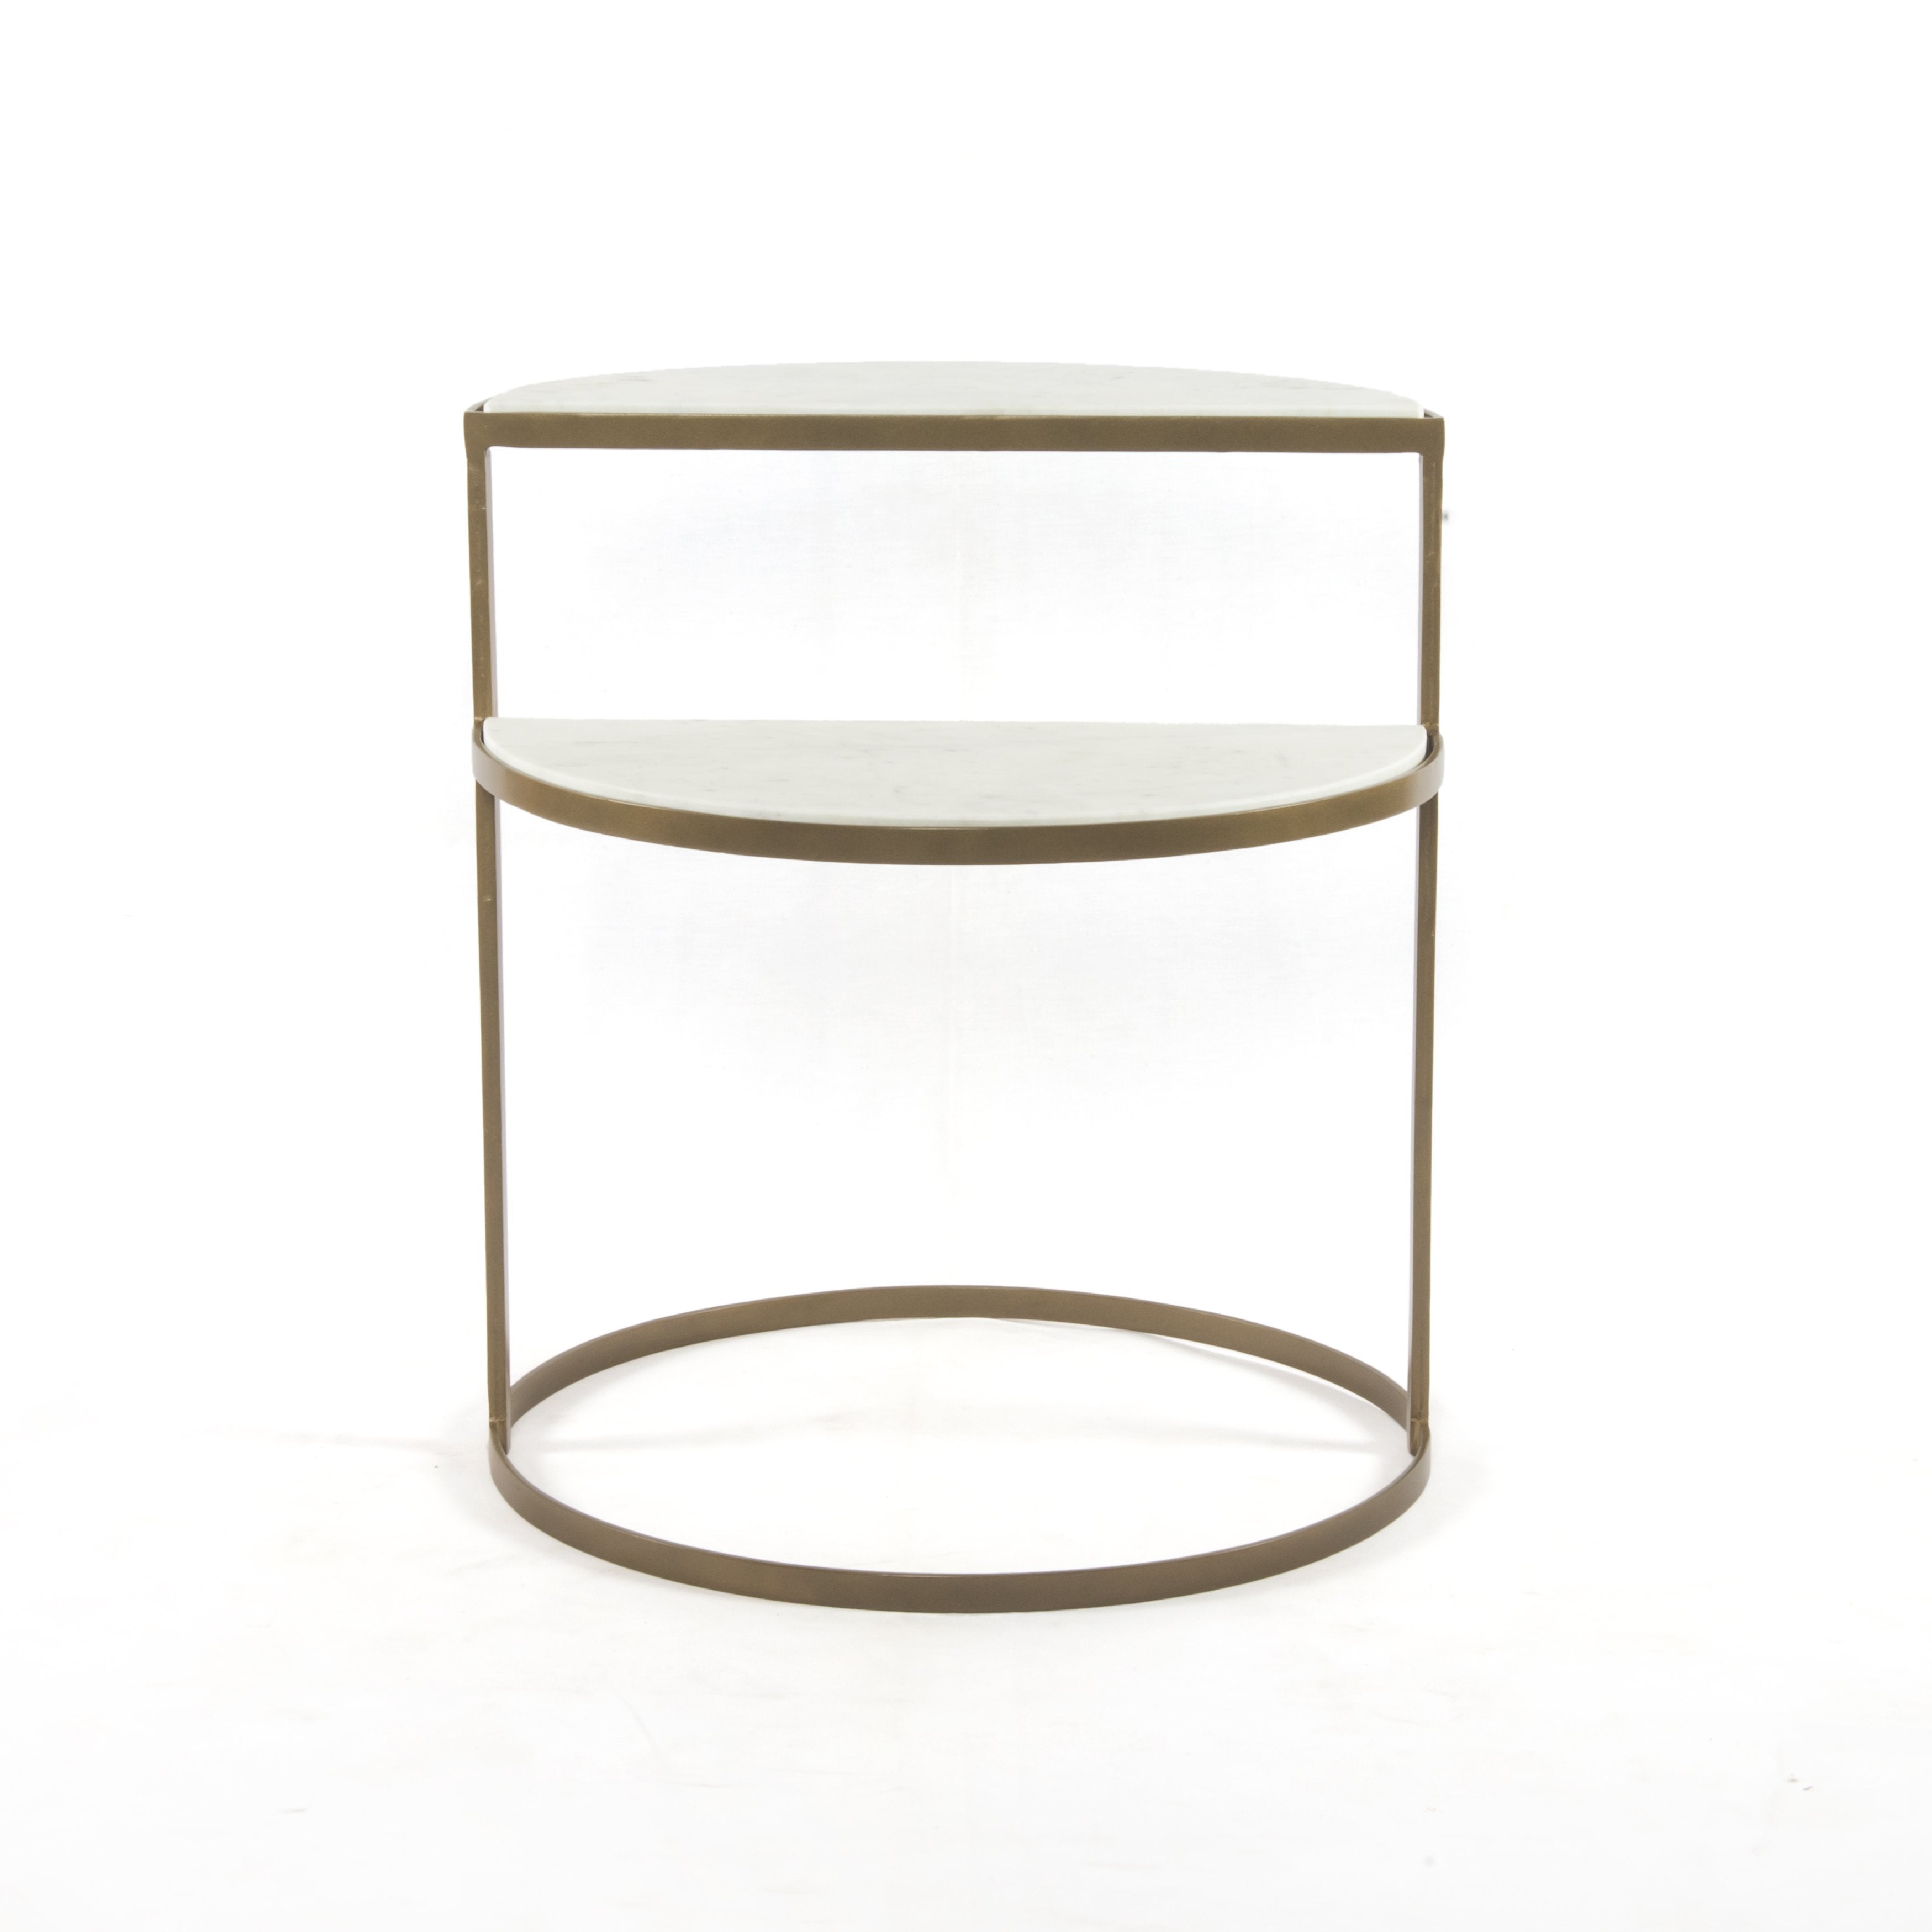 Bonnell Nightstand in Antique Brass and Polished White Marble